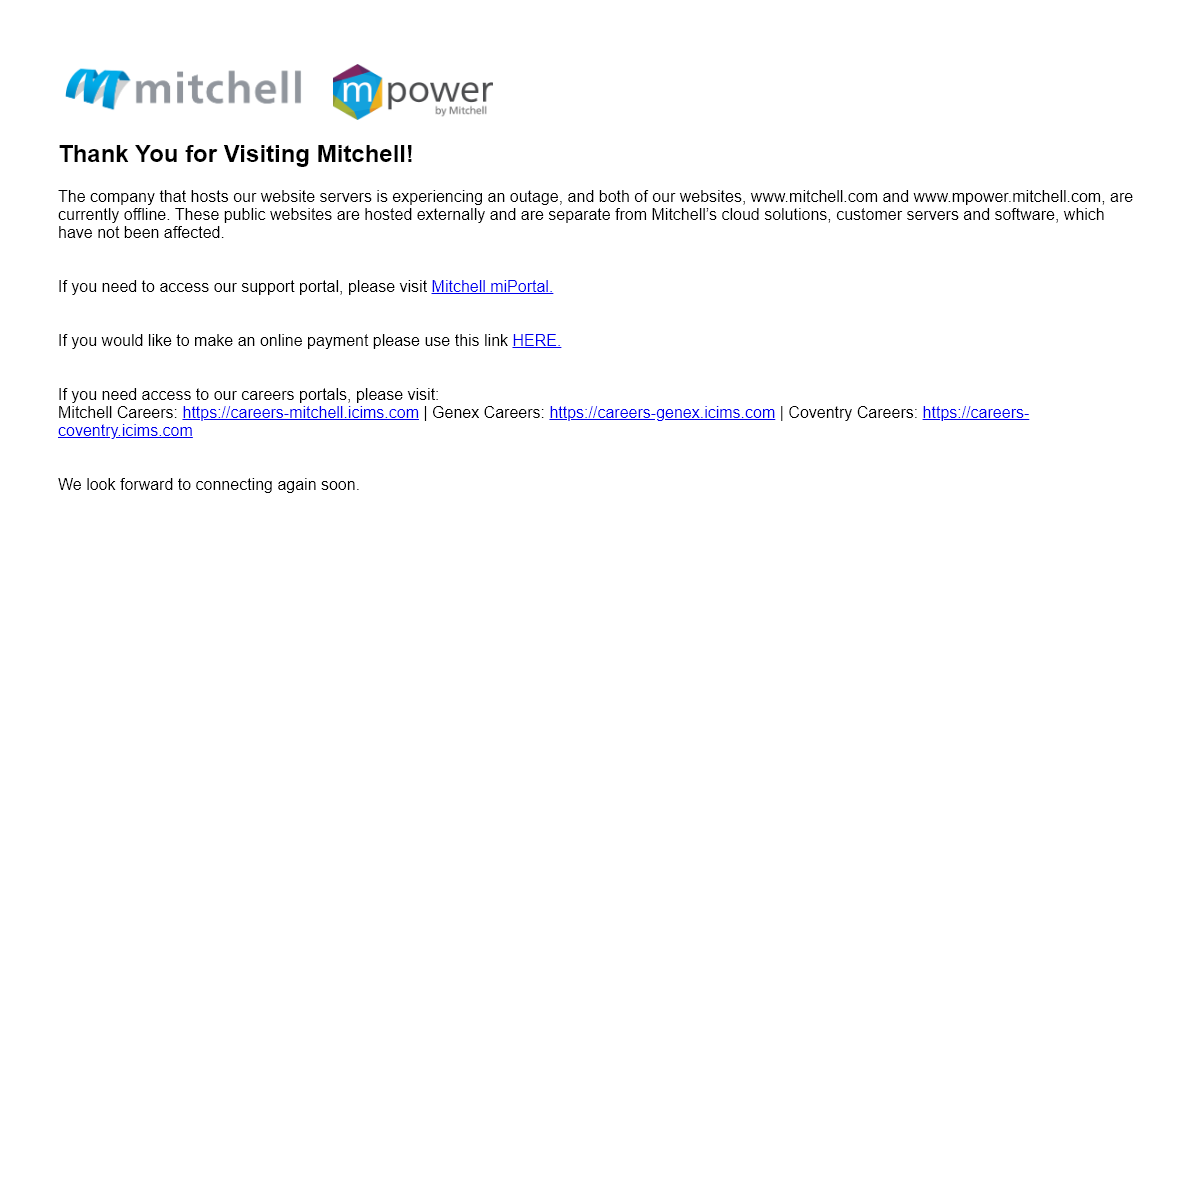 A complete backup of mitchell.com